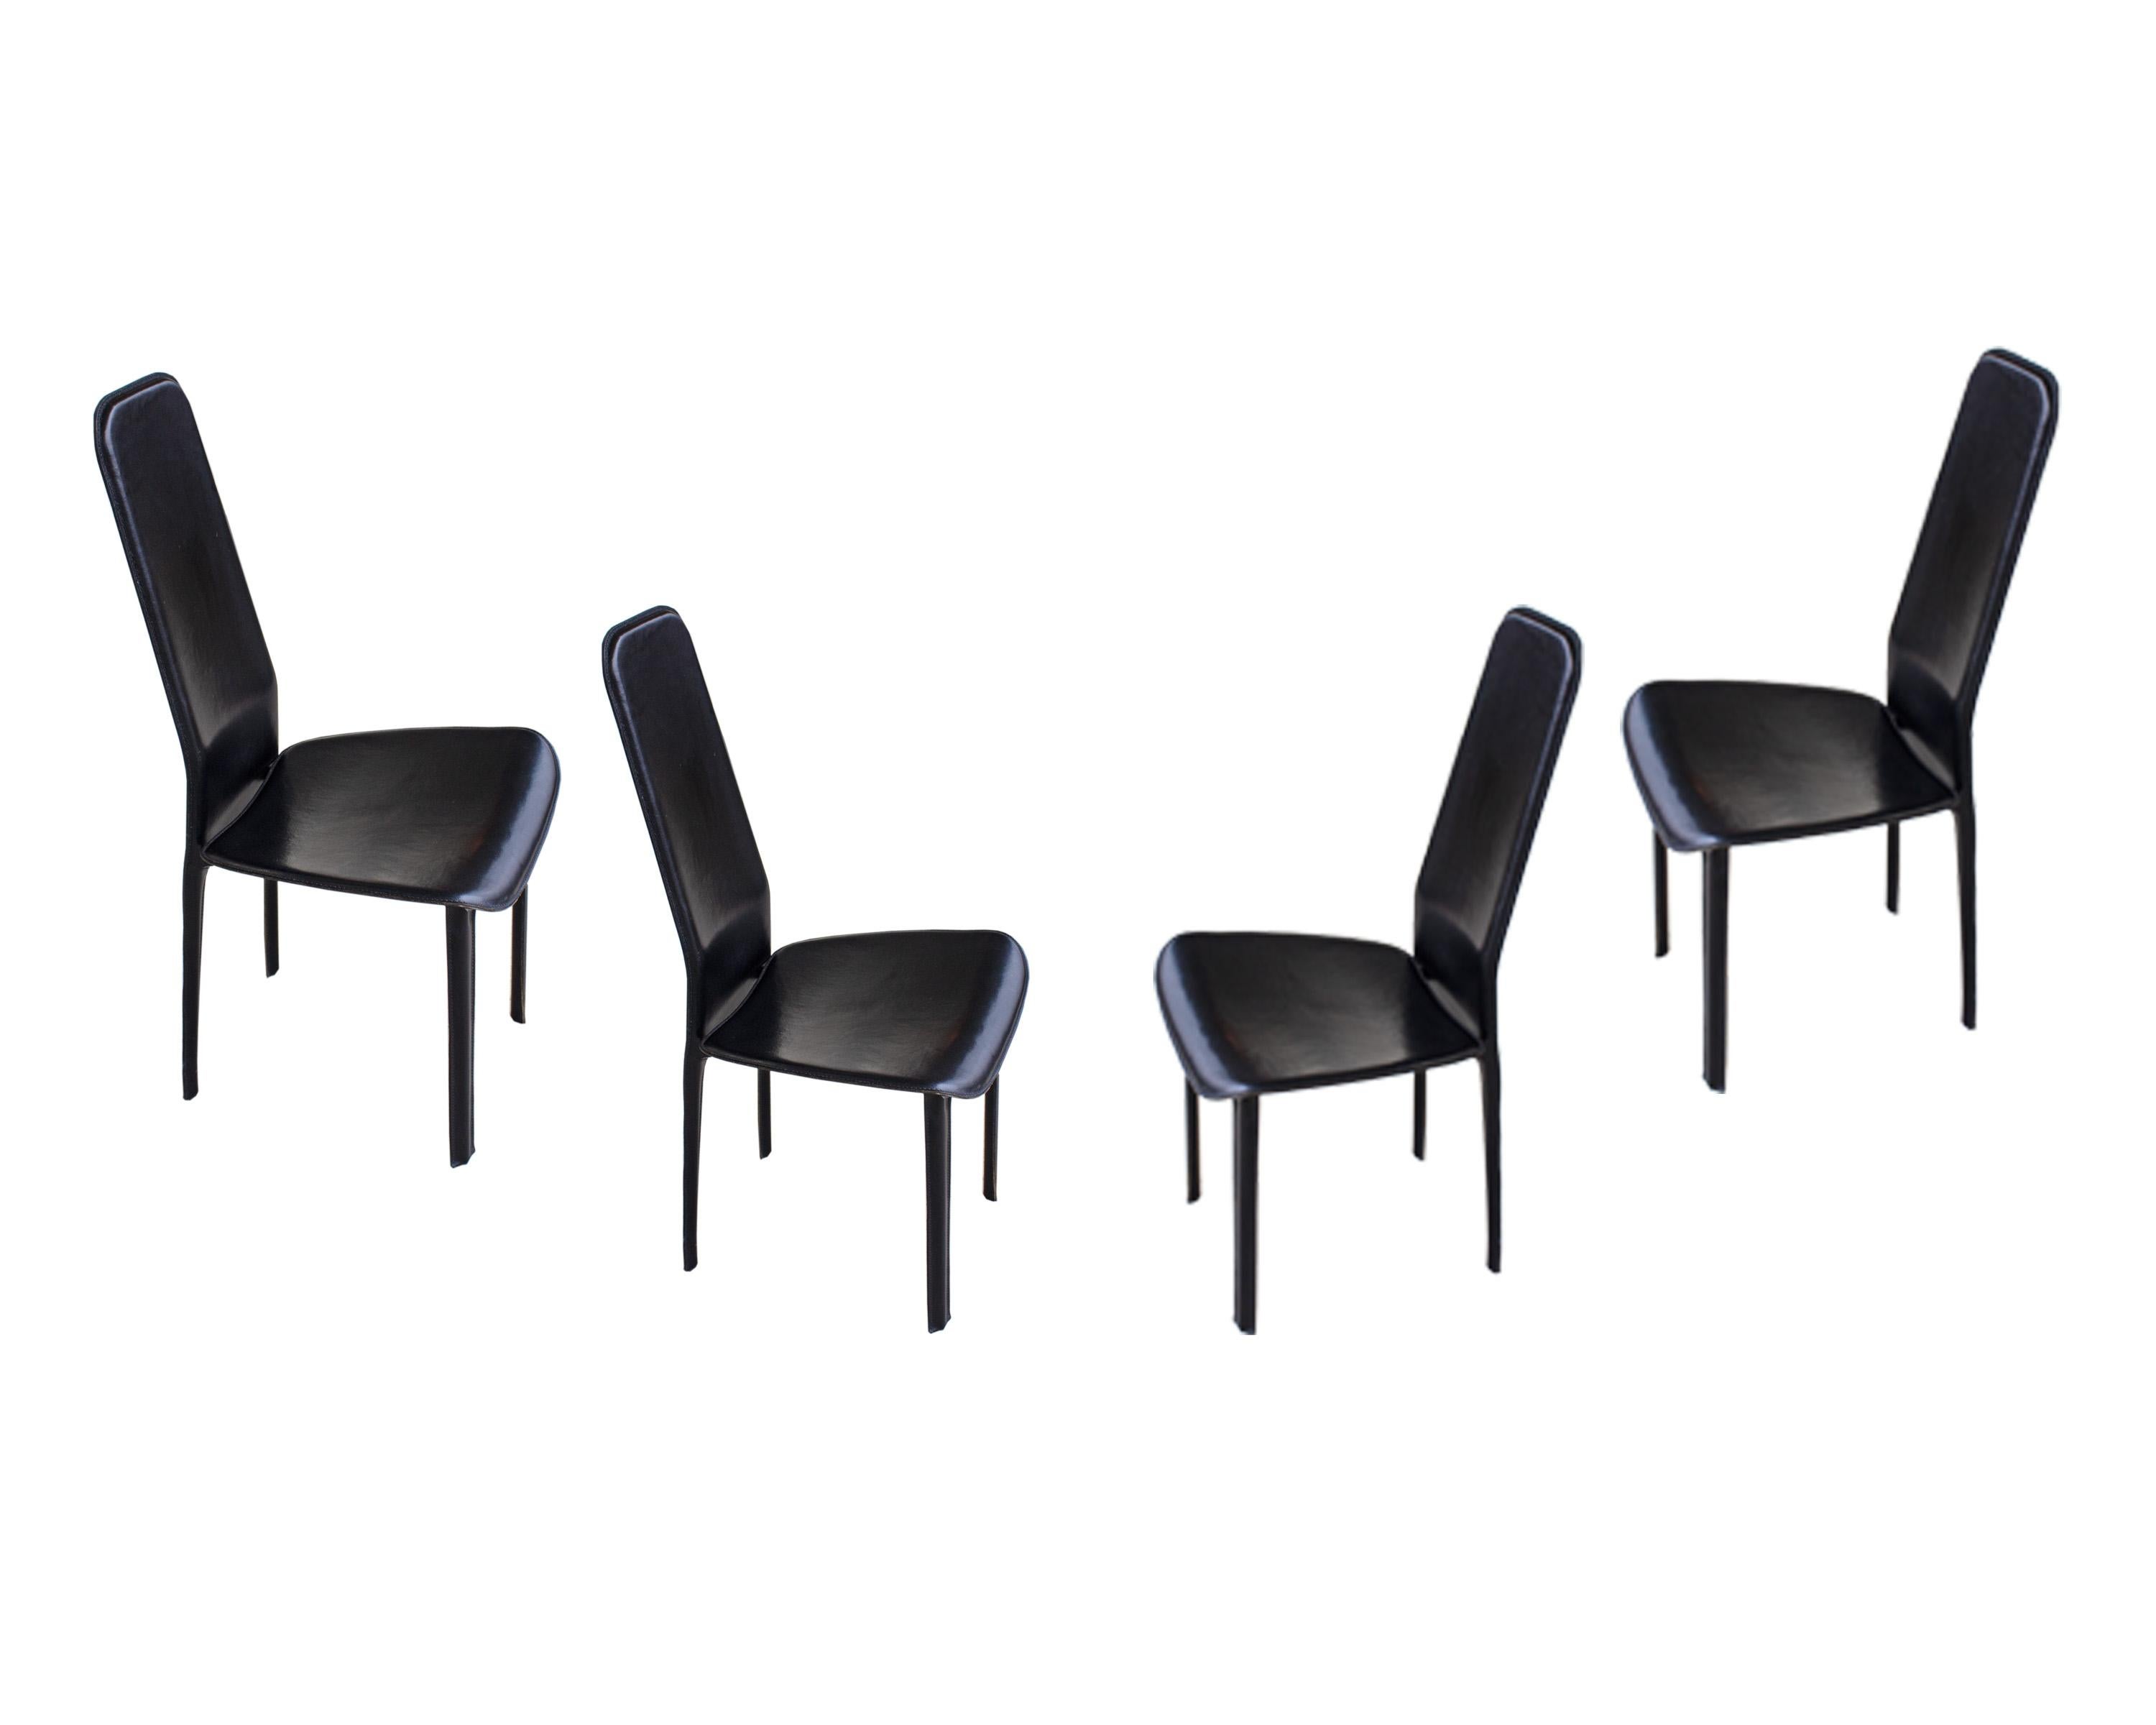 A set of four Italian Postmodern Cidue Elementi d'Arredo black leather chairs. The chairs are composed of metal frames and are covered in black leather that creates an overall sleek design. The original 